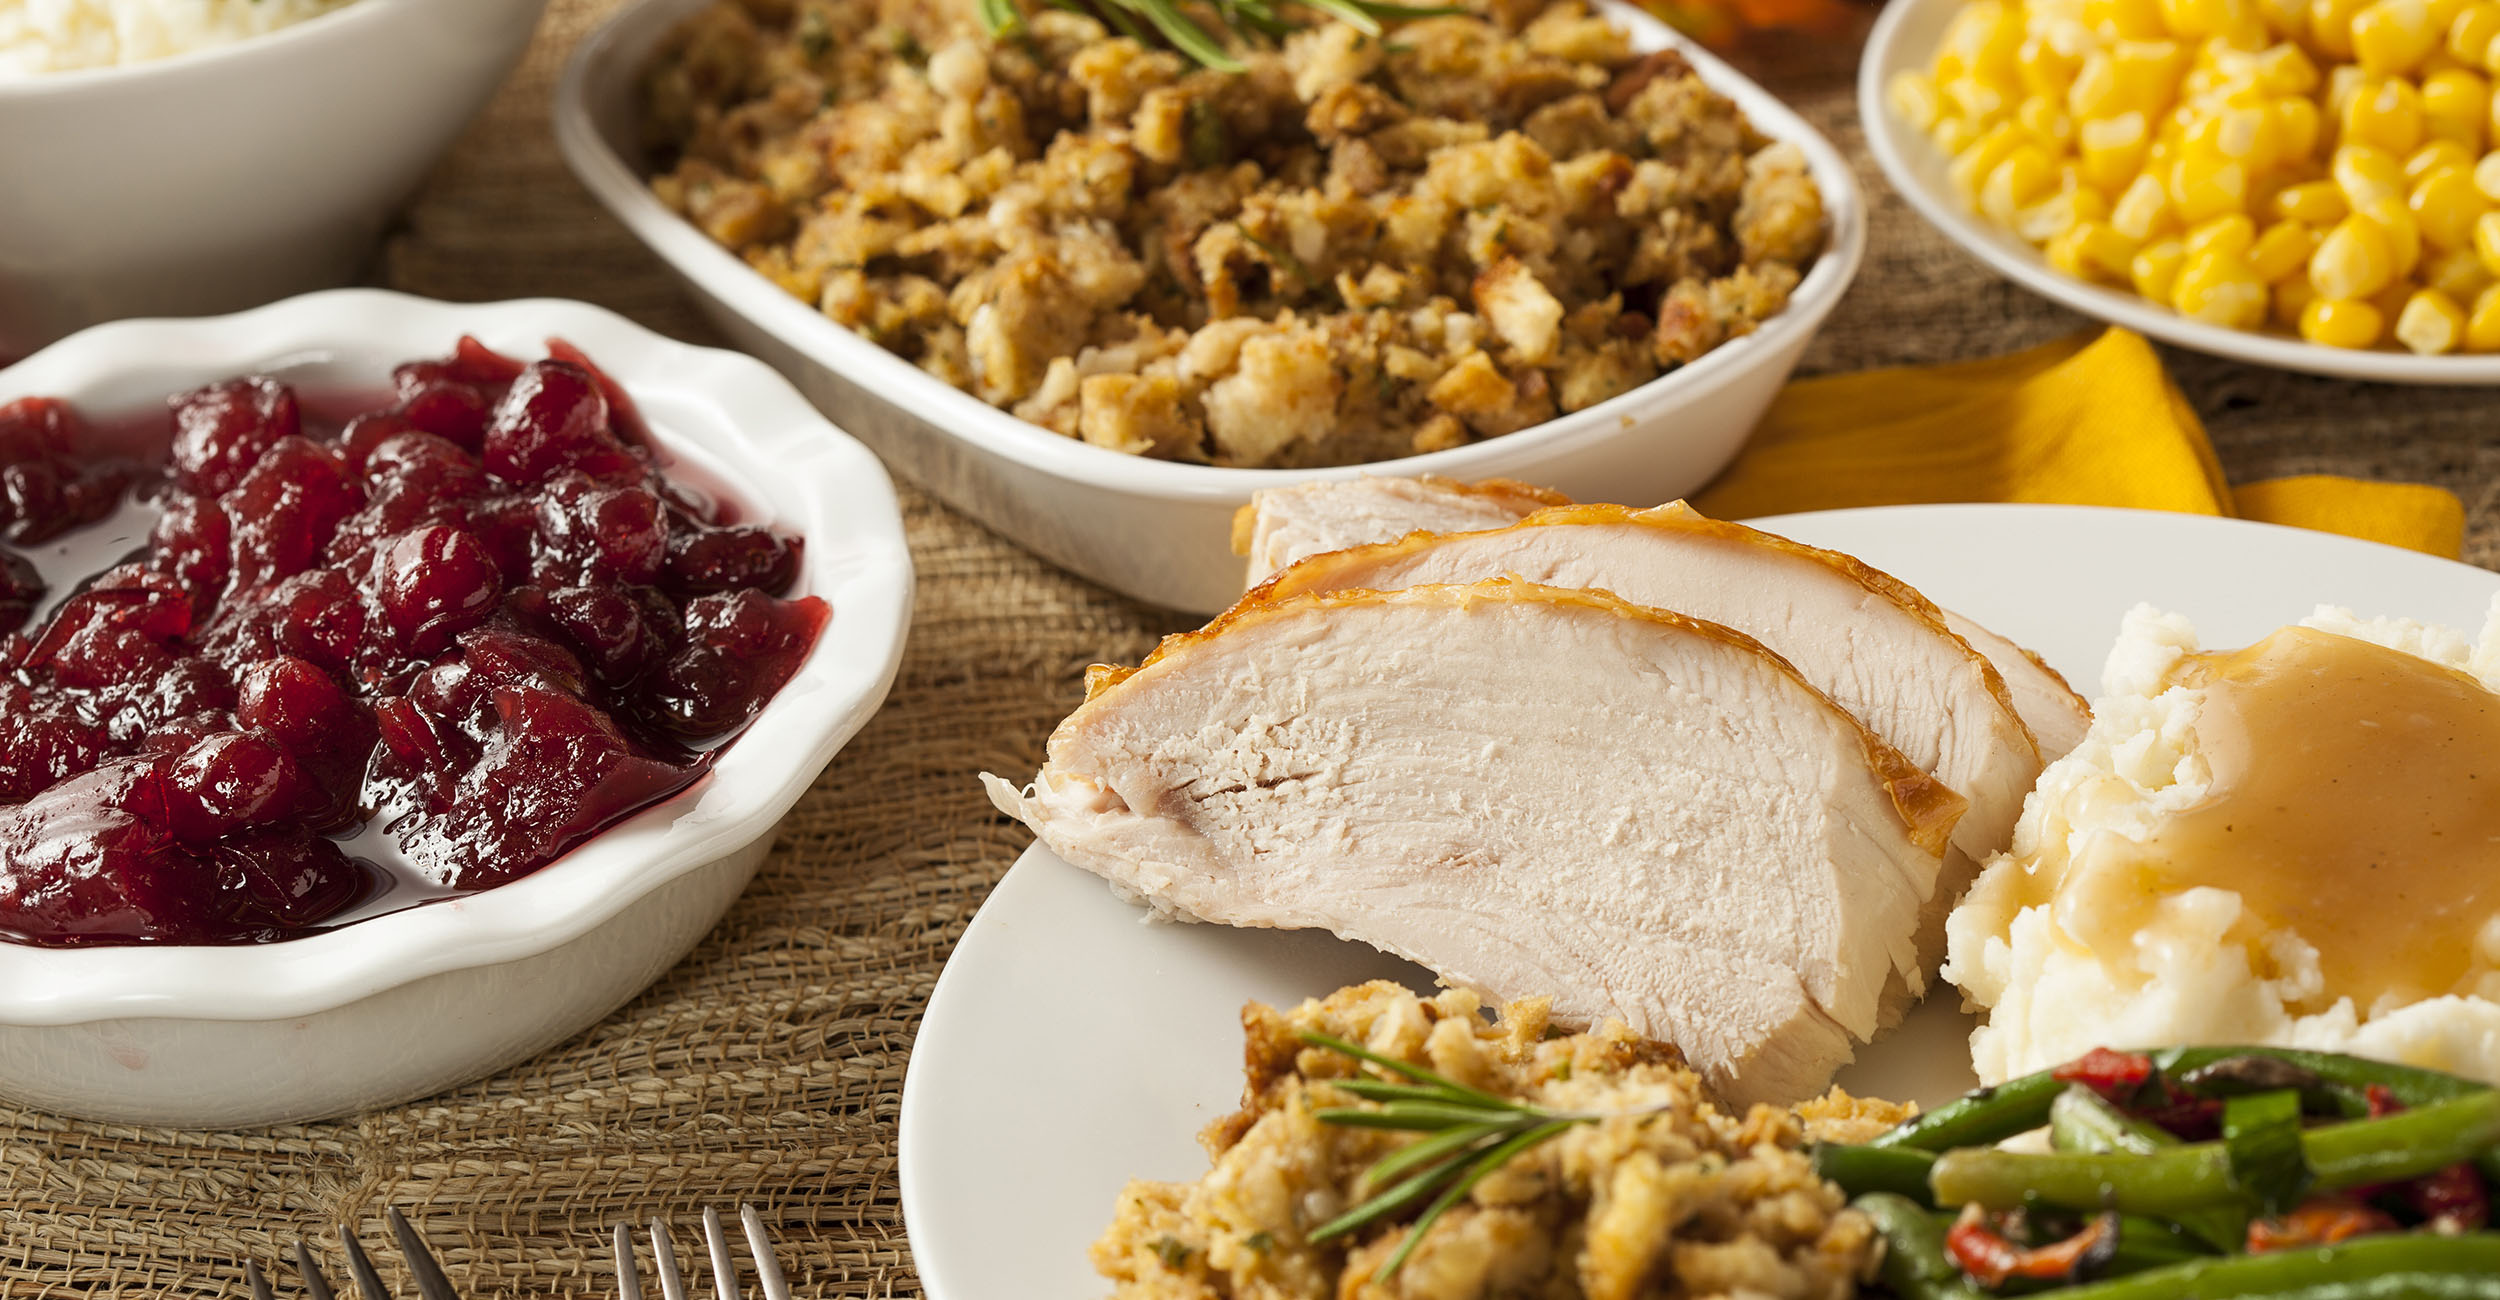 What causes post-meal drowsiness on Thanksgiving day? | Oklahoma State ...